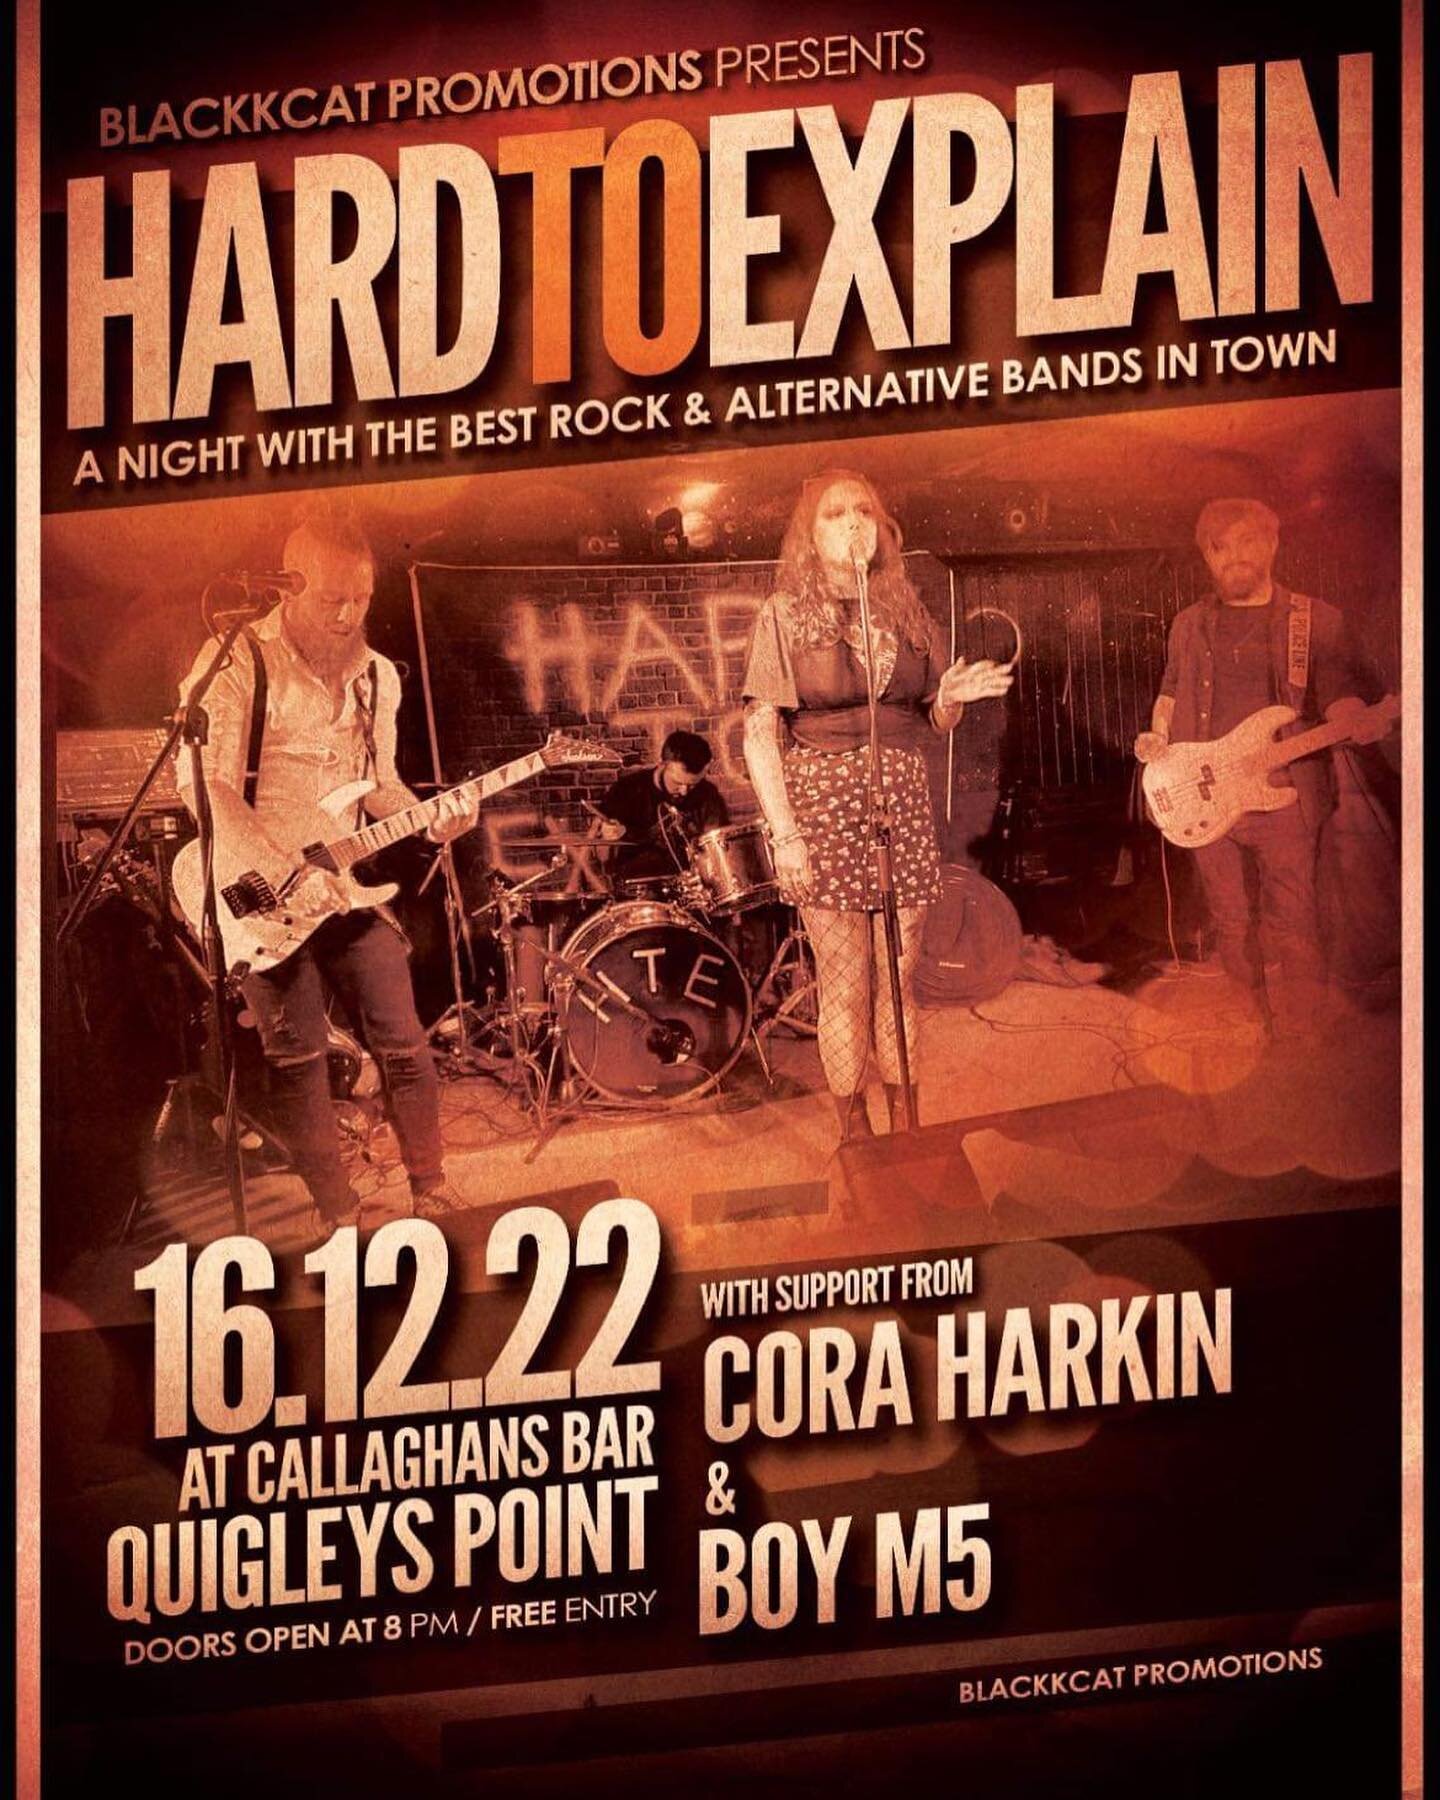 Whoop!! 🔥Show Announcement!! 🔥
On 16th of December we&rsquo;ll be sharing the stage with our friends @hardtoexplainofficial and @coraharkinmusic at Callaghans - Quigleys Point! Can&rsquo;t wait! Be there or be simply uncool!